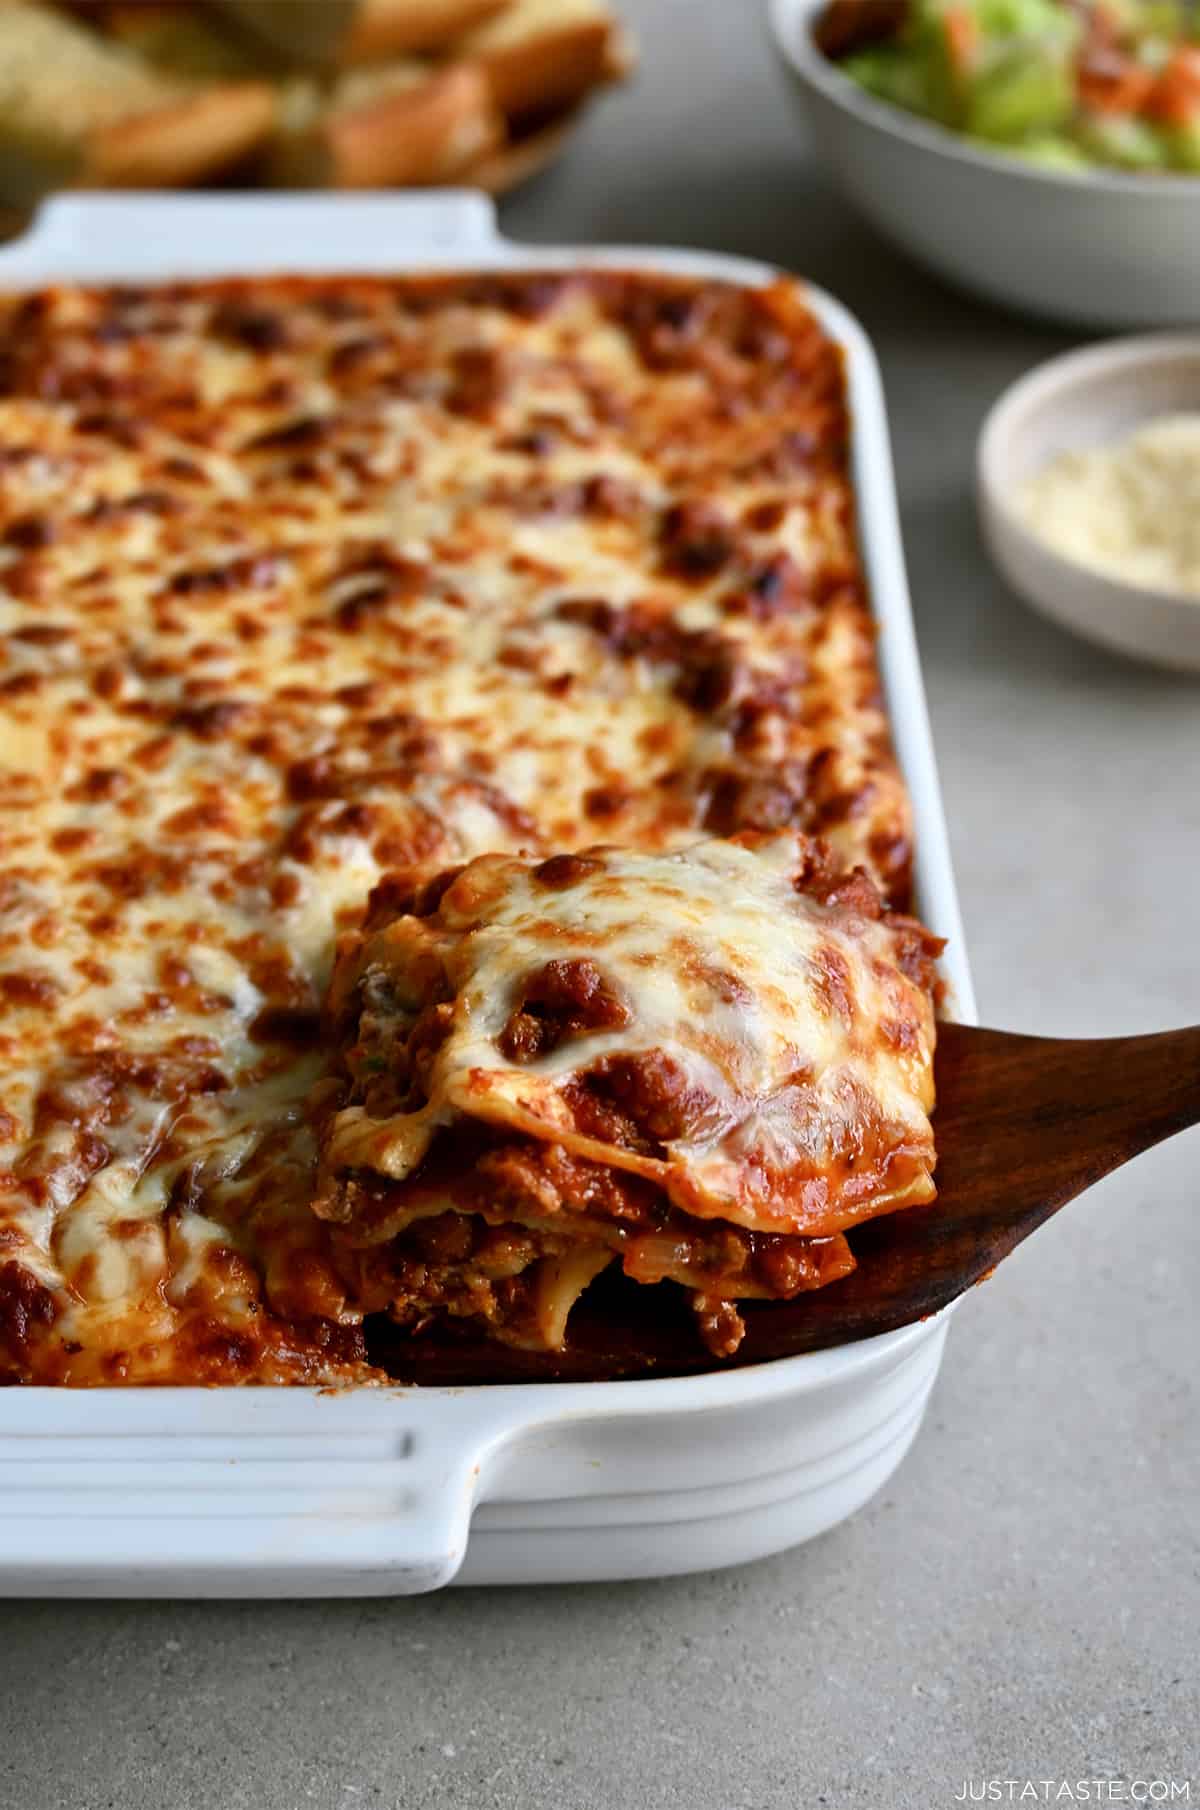 A wooden spatula lifts a slice of lasagna out of a baking dish.